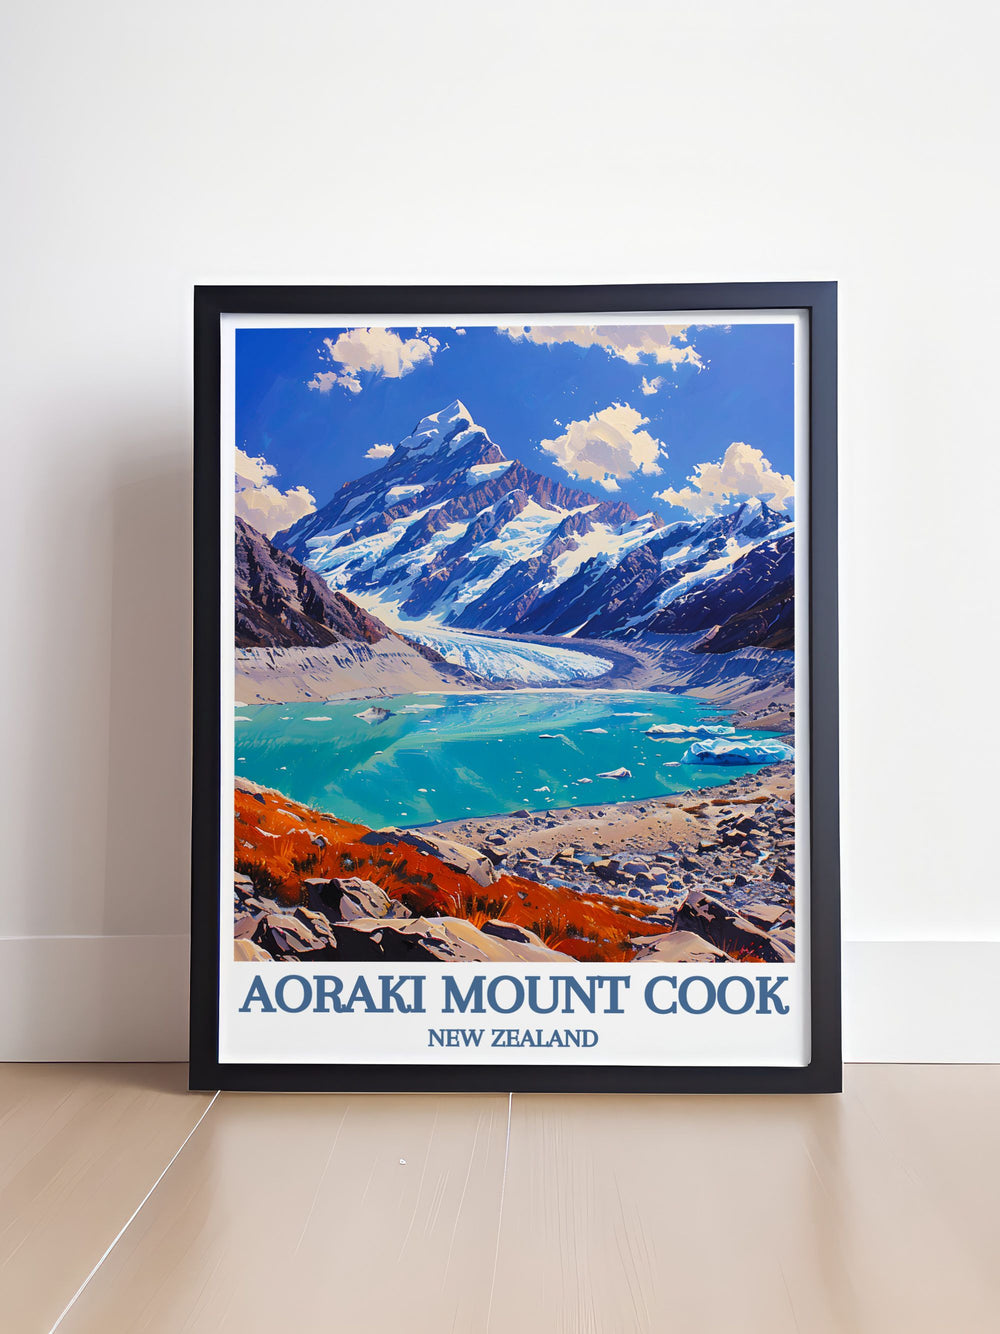 Modern print of Aoraki Mount Cook rising above the calm waters of Lake Pukaki, captured in a contemporary style that highlights the peaks majestic presence.